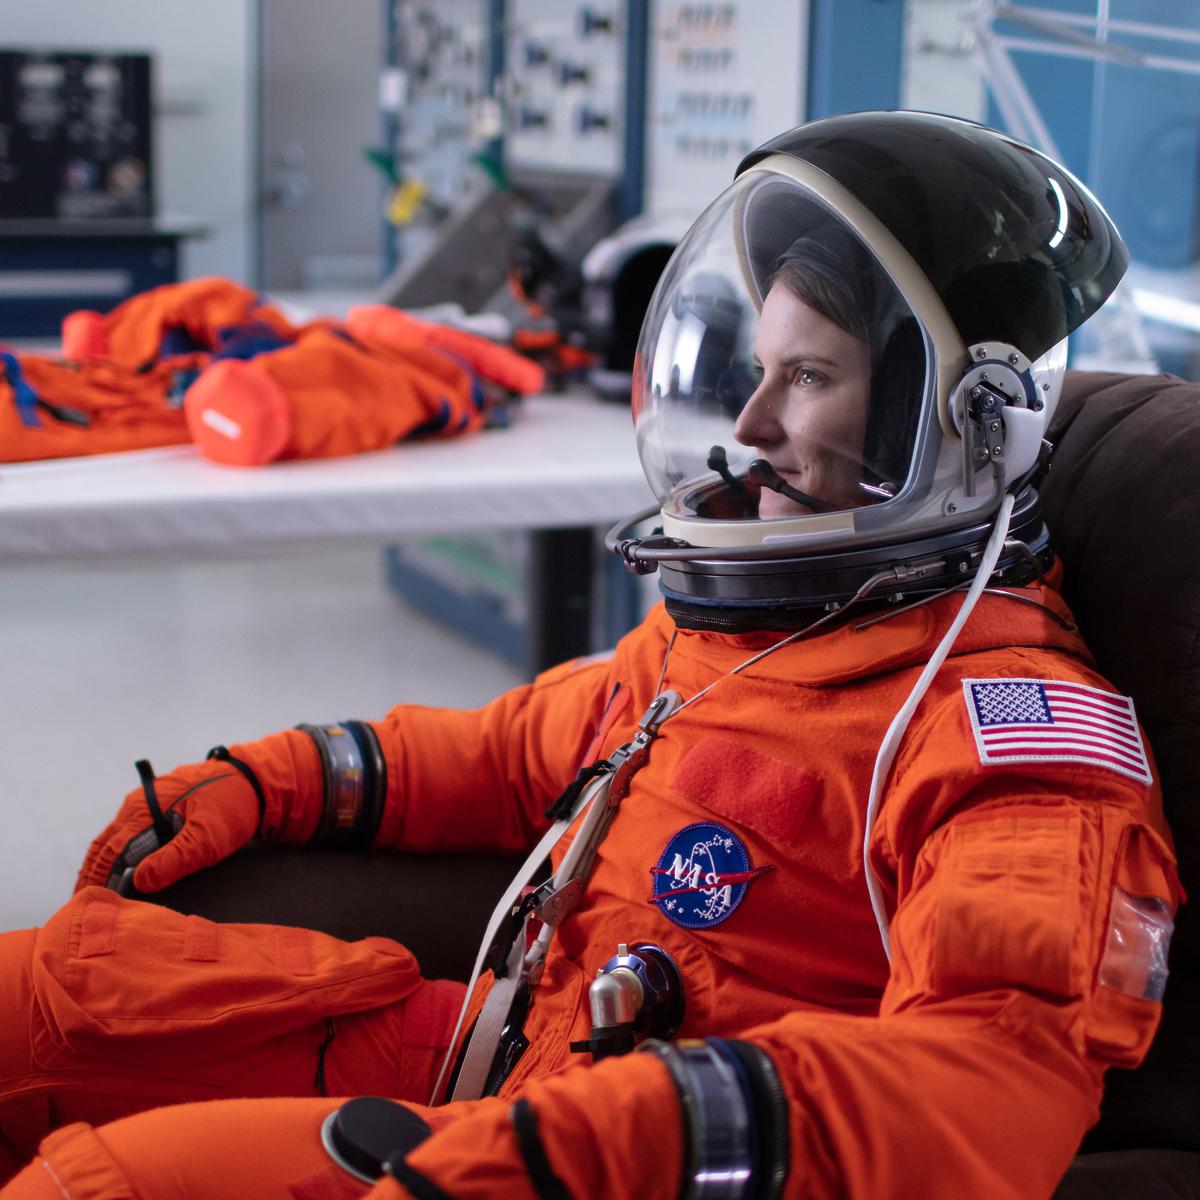 NASA astronaut candidate Kayla Barron after donning her spacesuit at NASA's Johnson Space Center in Houston, Texas, on July 12, 2019 (©NASA | <a href="https://www.flickr.com/photos/nasa2explore/48466927517/in/album-72157698260056092/">Bill Ingalls</a>)